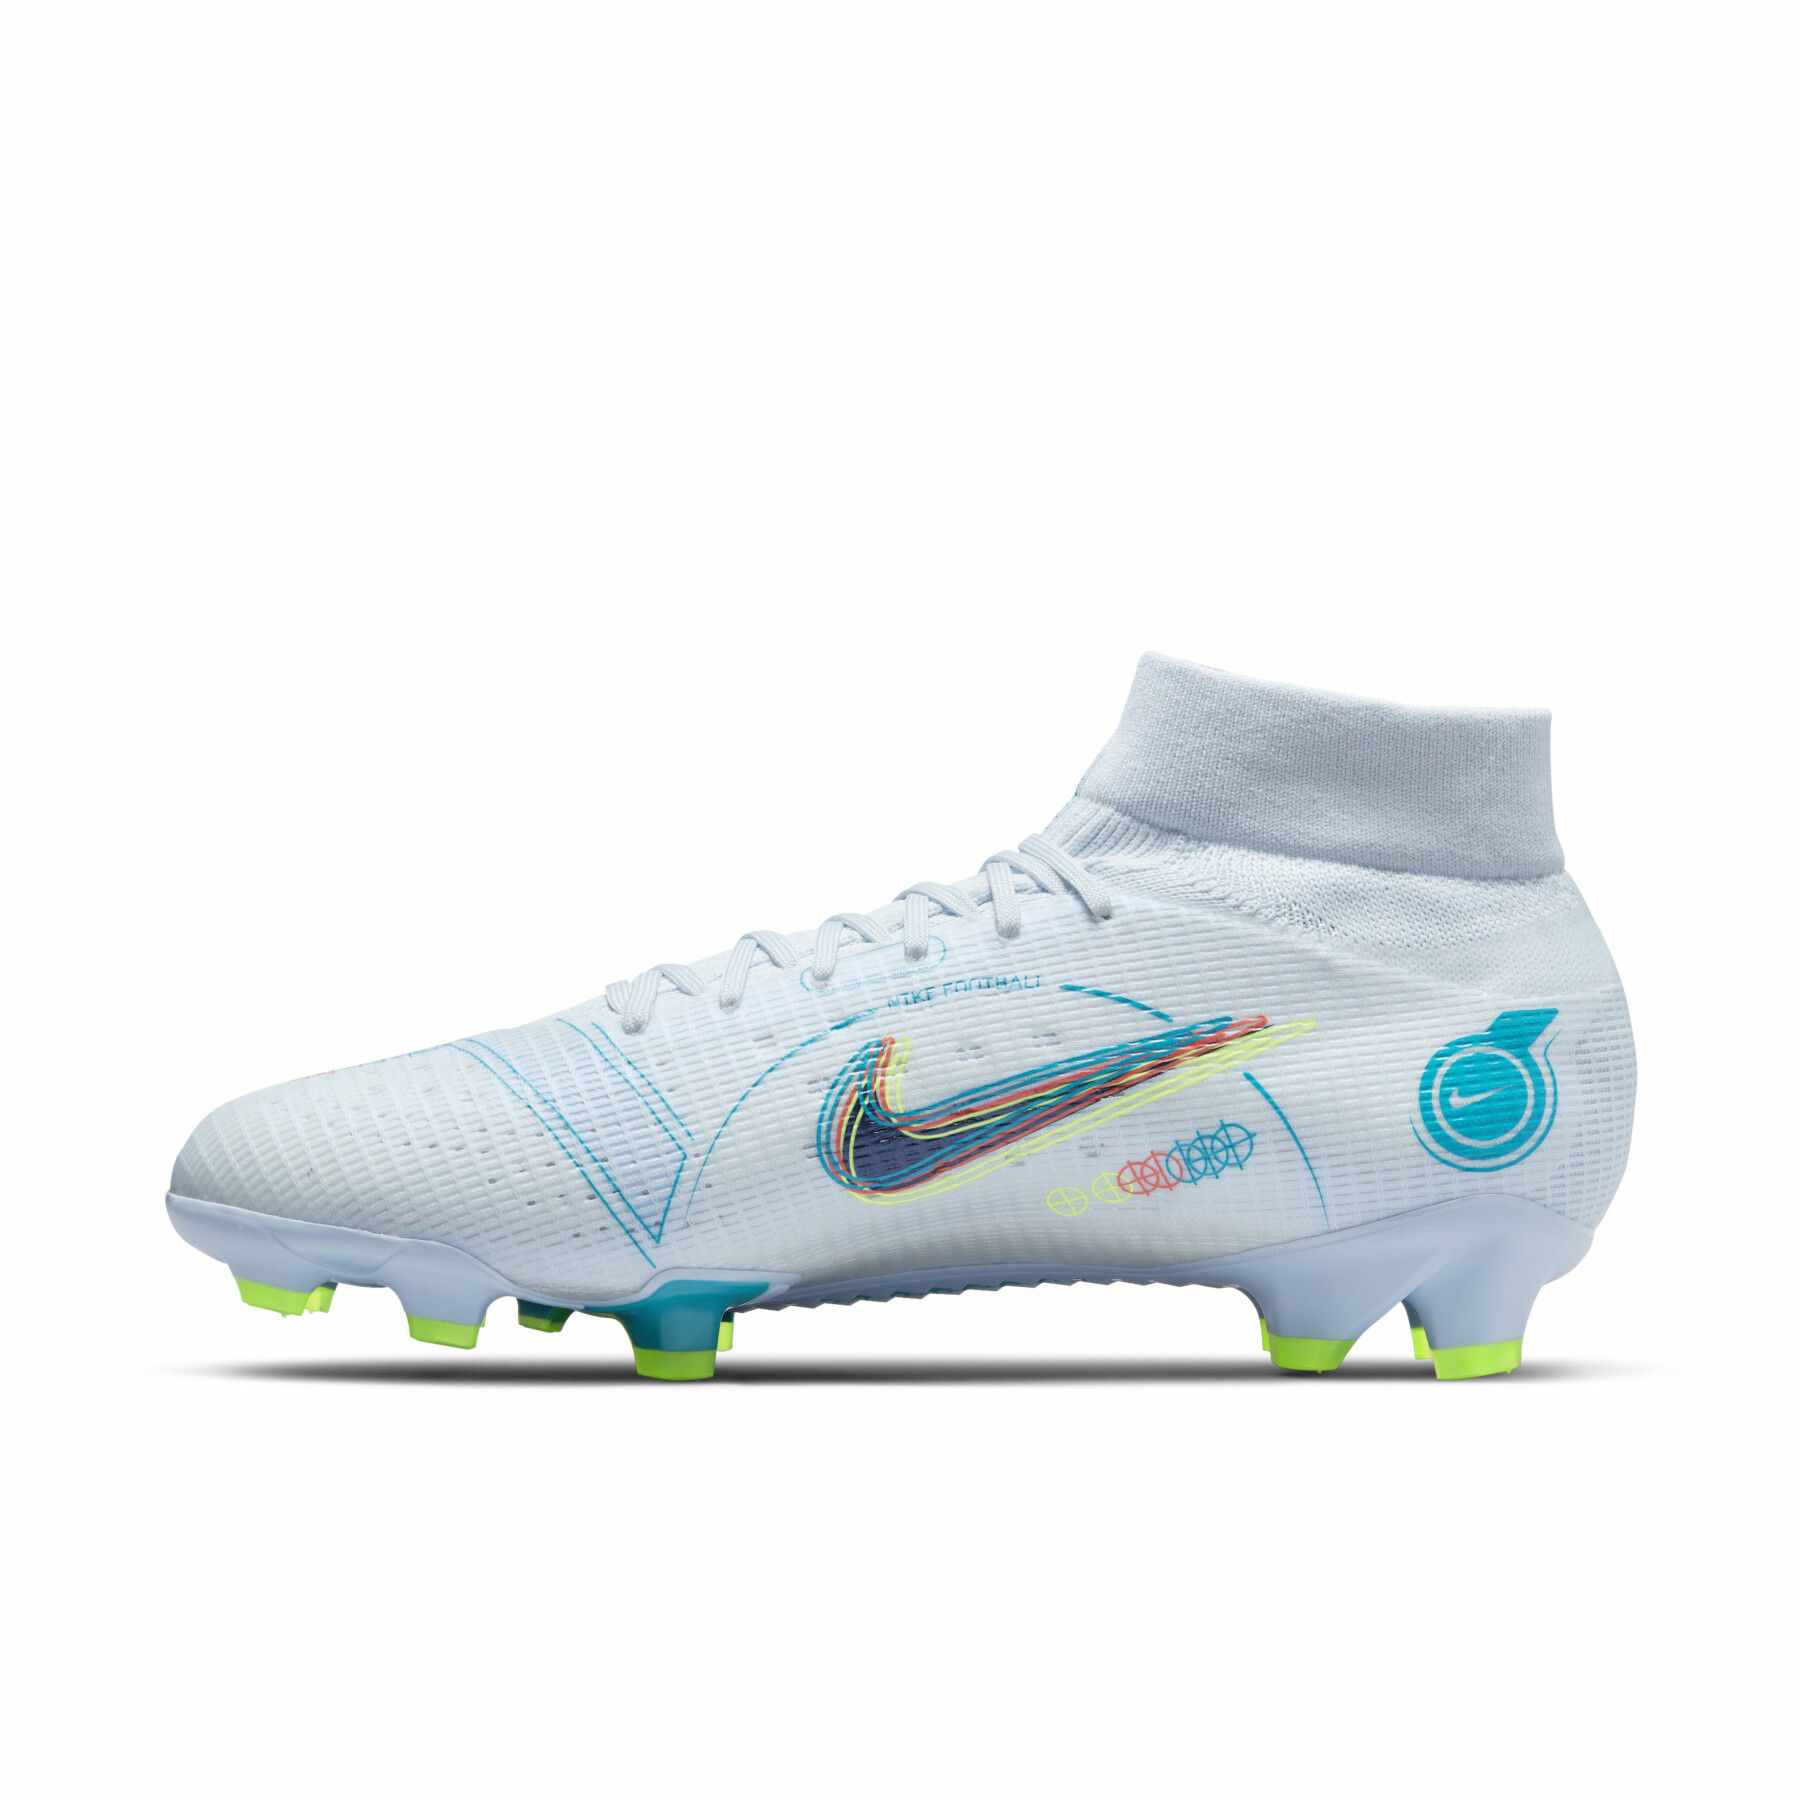 Chaussures de football Nike Mercurial Superfly 8 Pro FG